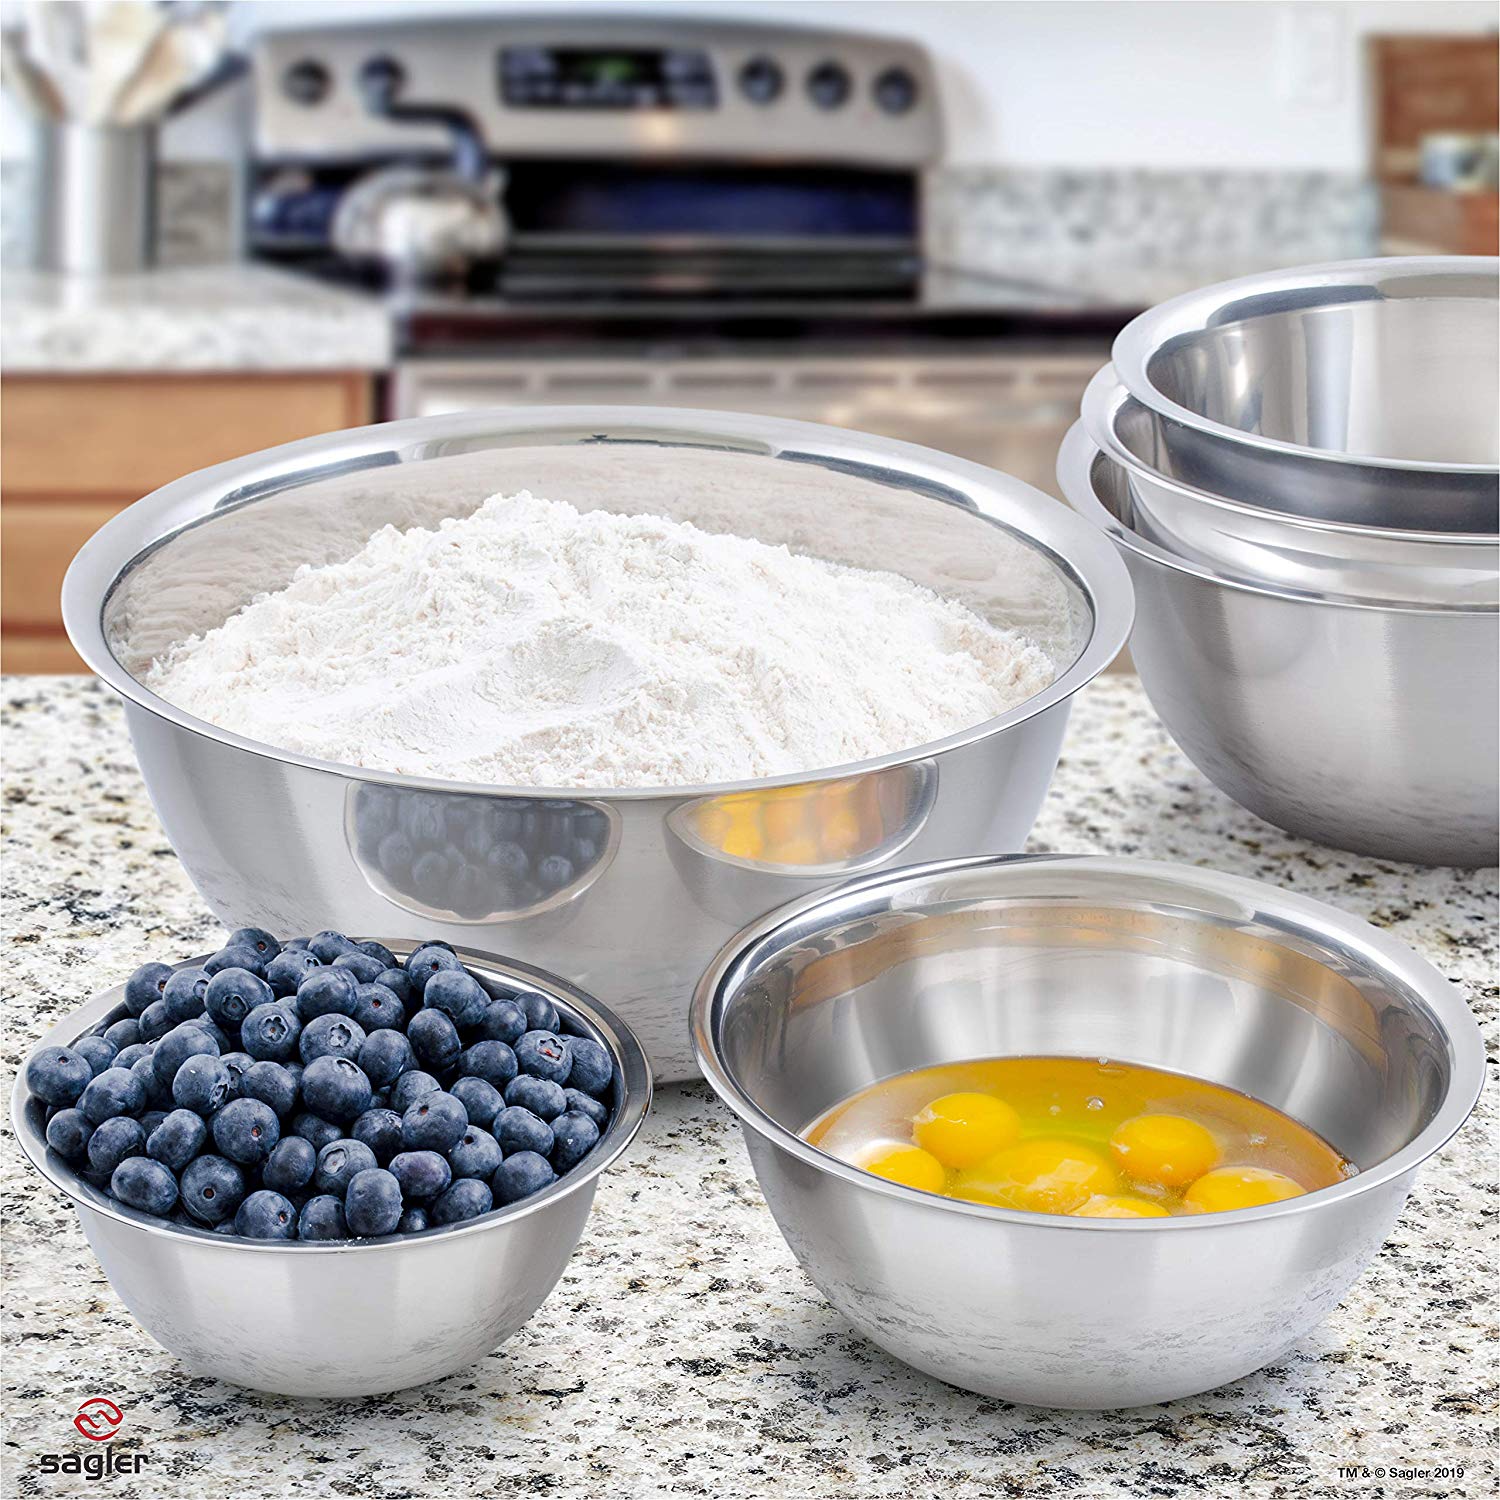 Home-it Set of 6 stainless Steel Mixing Bowls - image 5 of 5